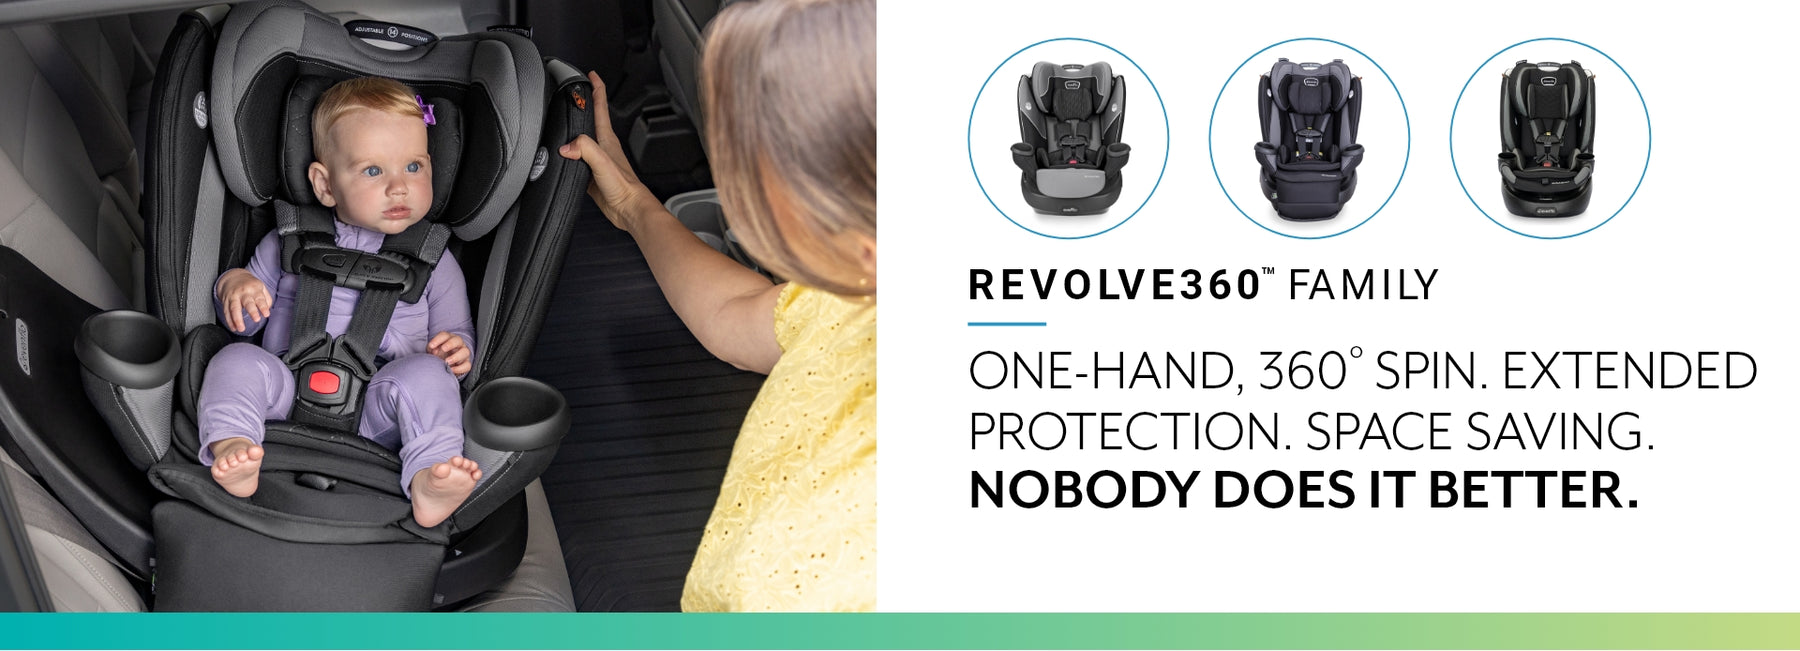 Revolve360 Family - One-Hand, 360 spin. Extended protection. Space saving. Nobody does it better. Image of child in Revolve360 Convertible Car Seat with mom rotating seat. 